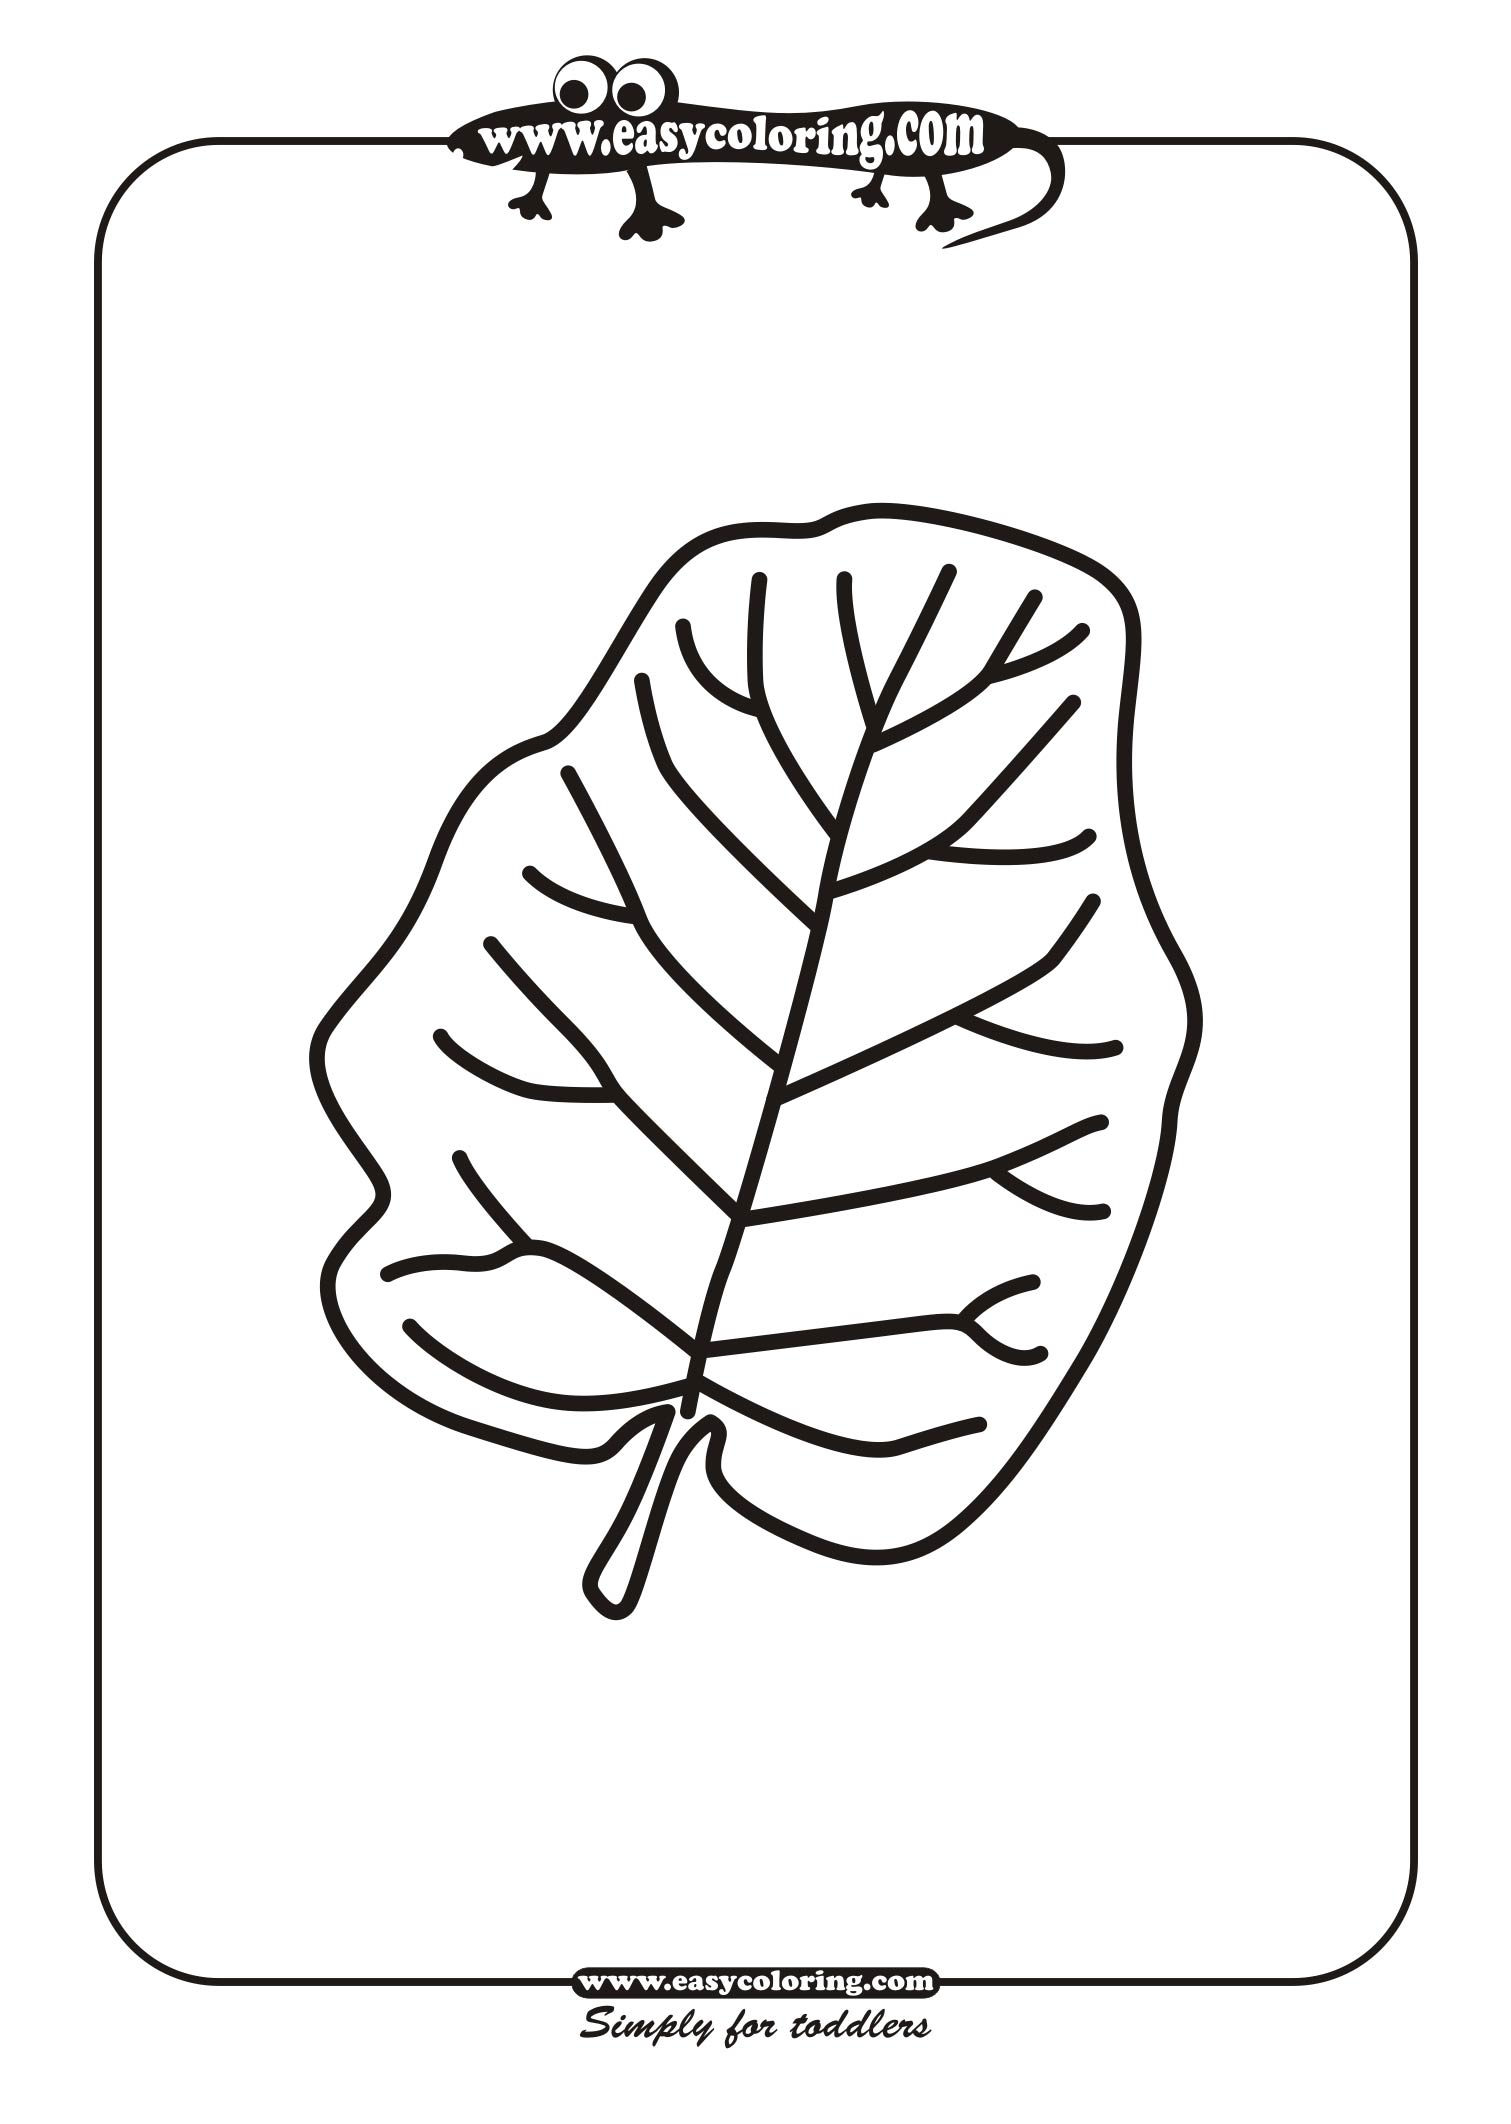 Leaf Five - Simple leafs | Easy coloring pages for toddlers